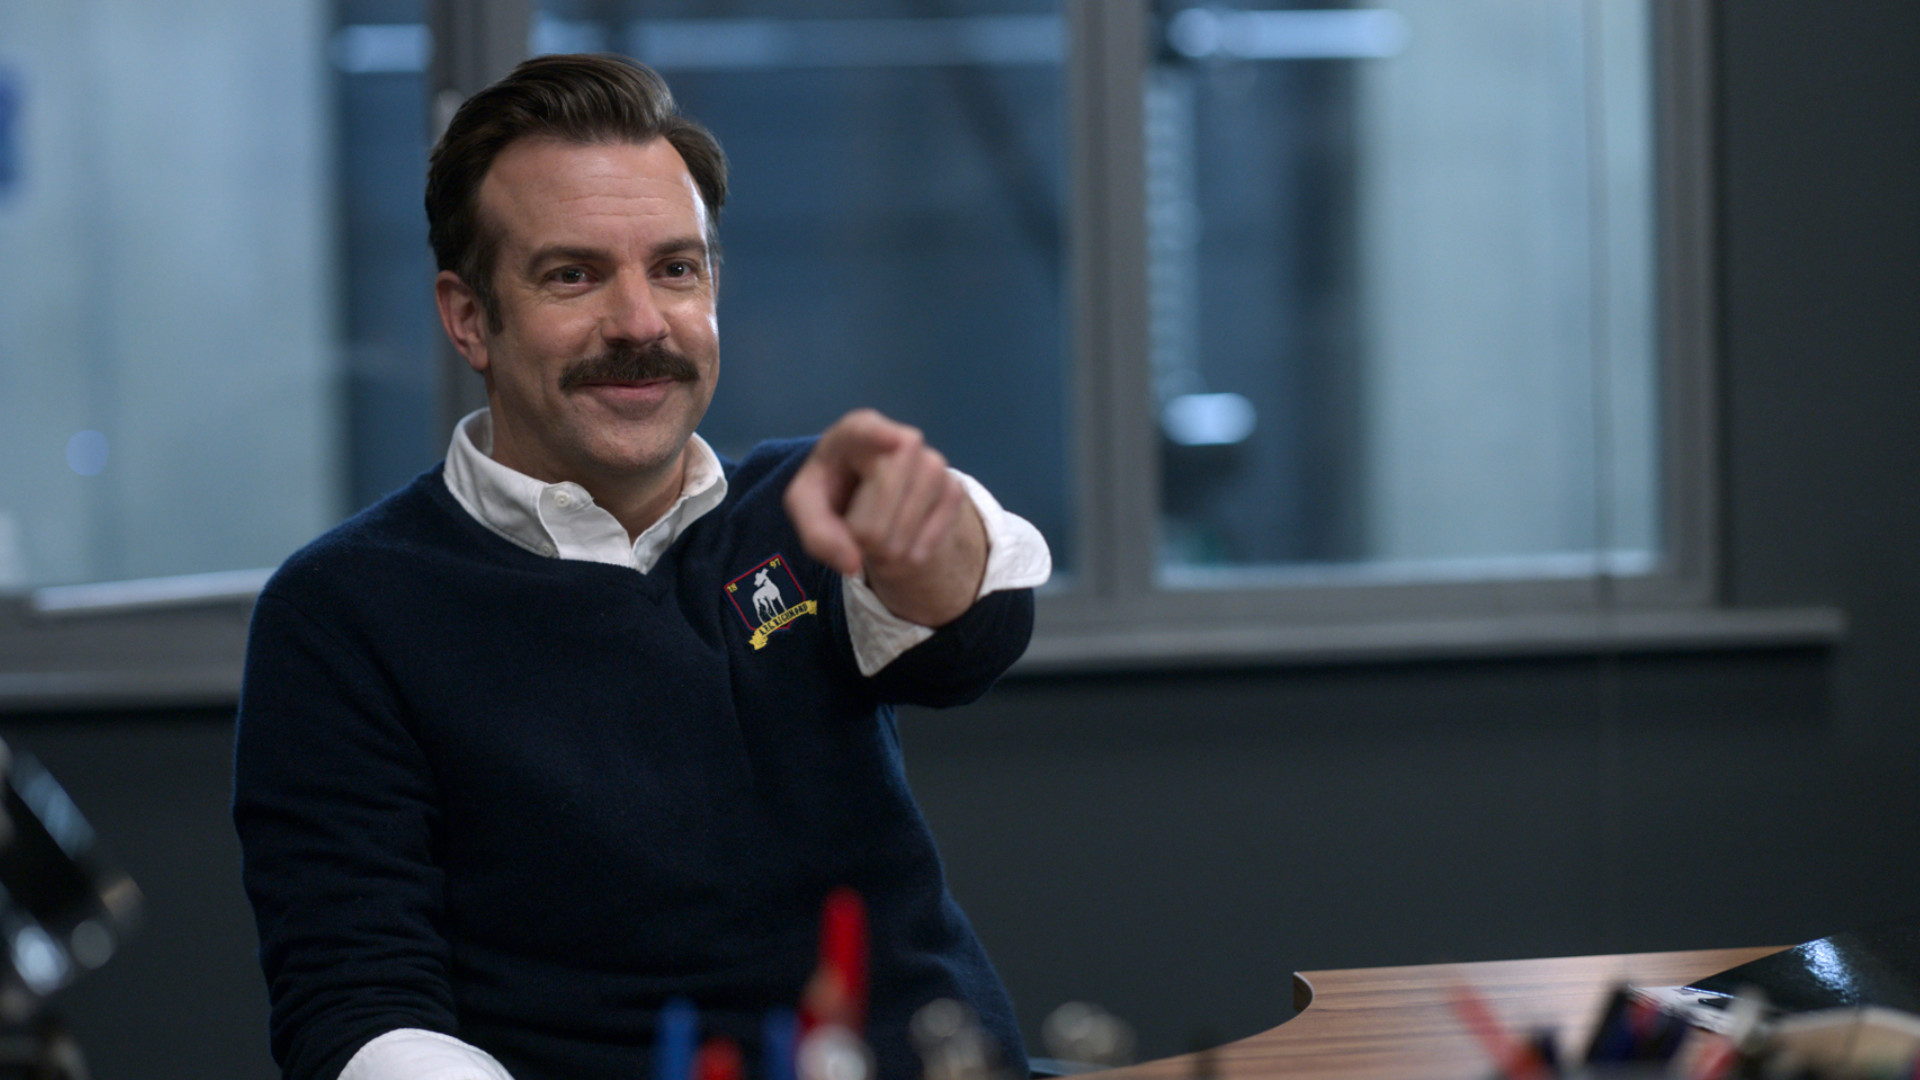 Ted Lasso season 3: Release date, cast, trailer, and everything we know |  GamesRadar+